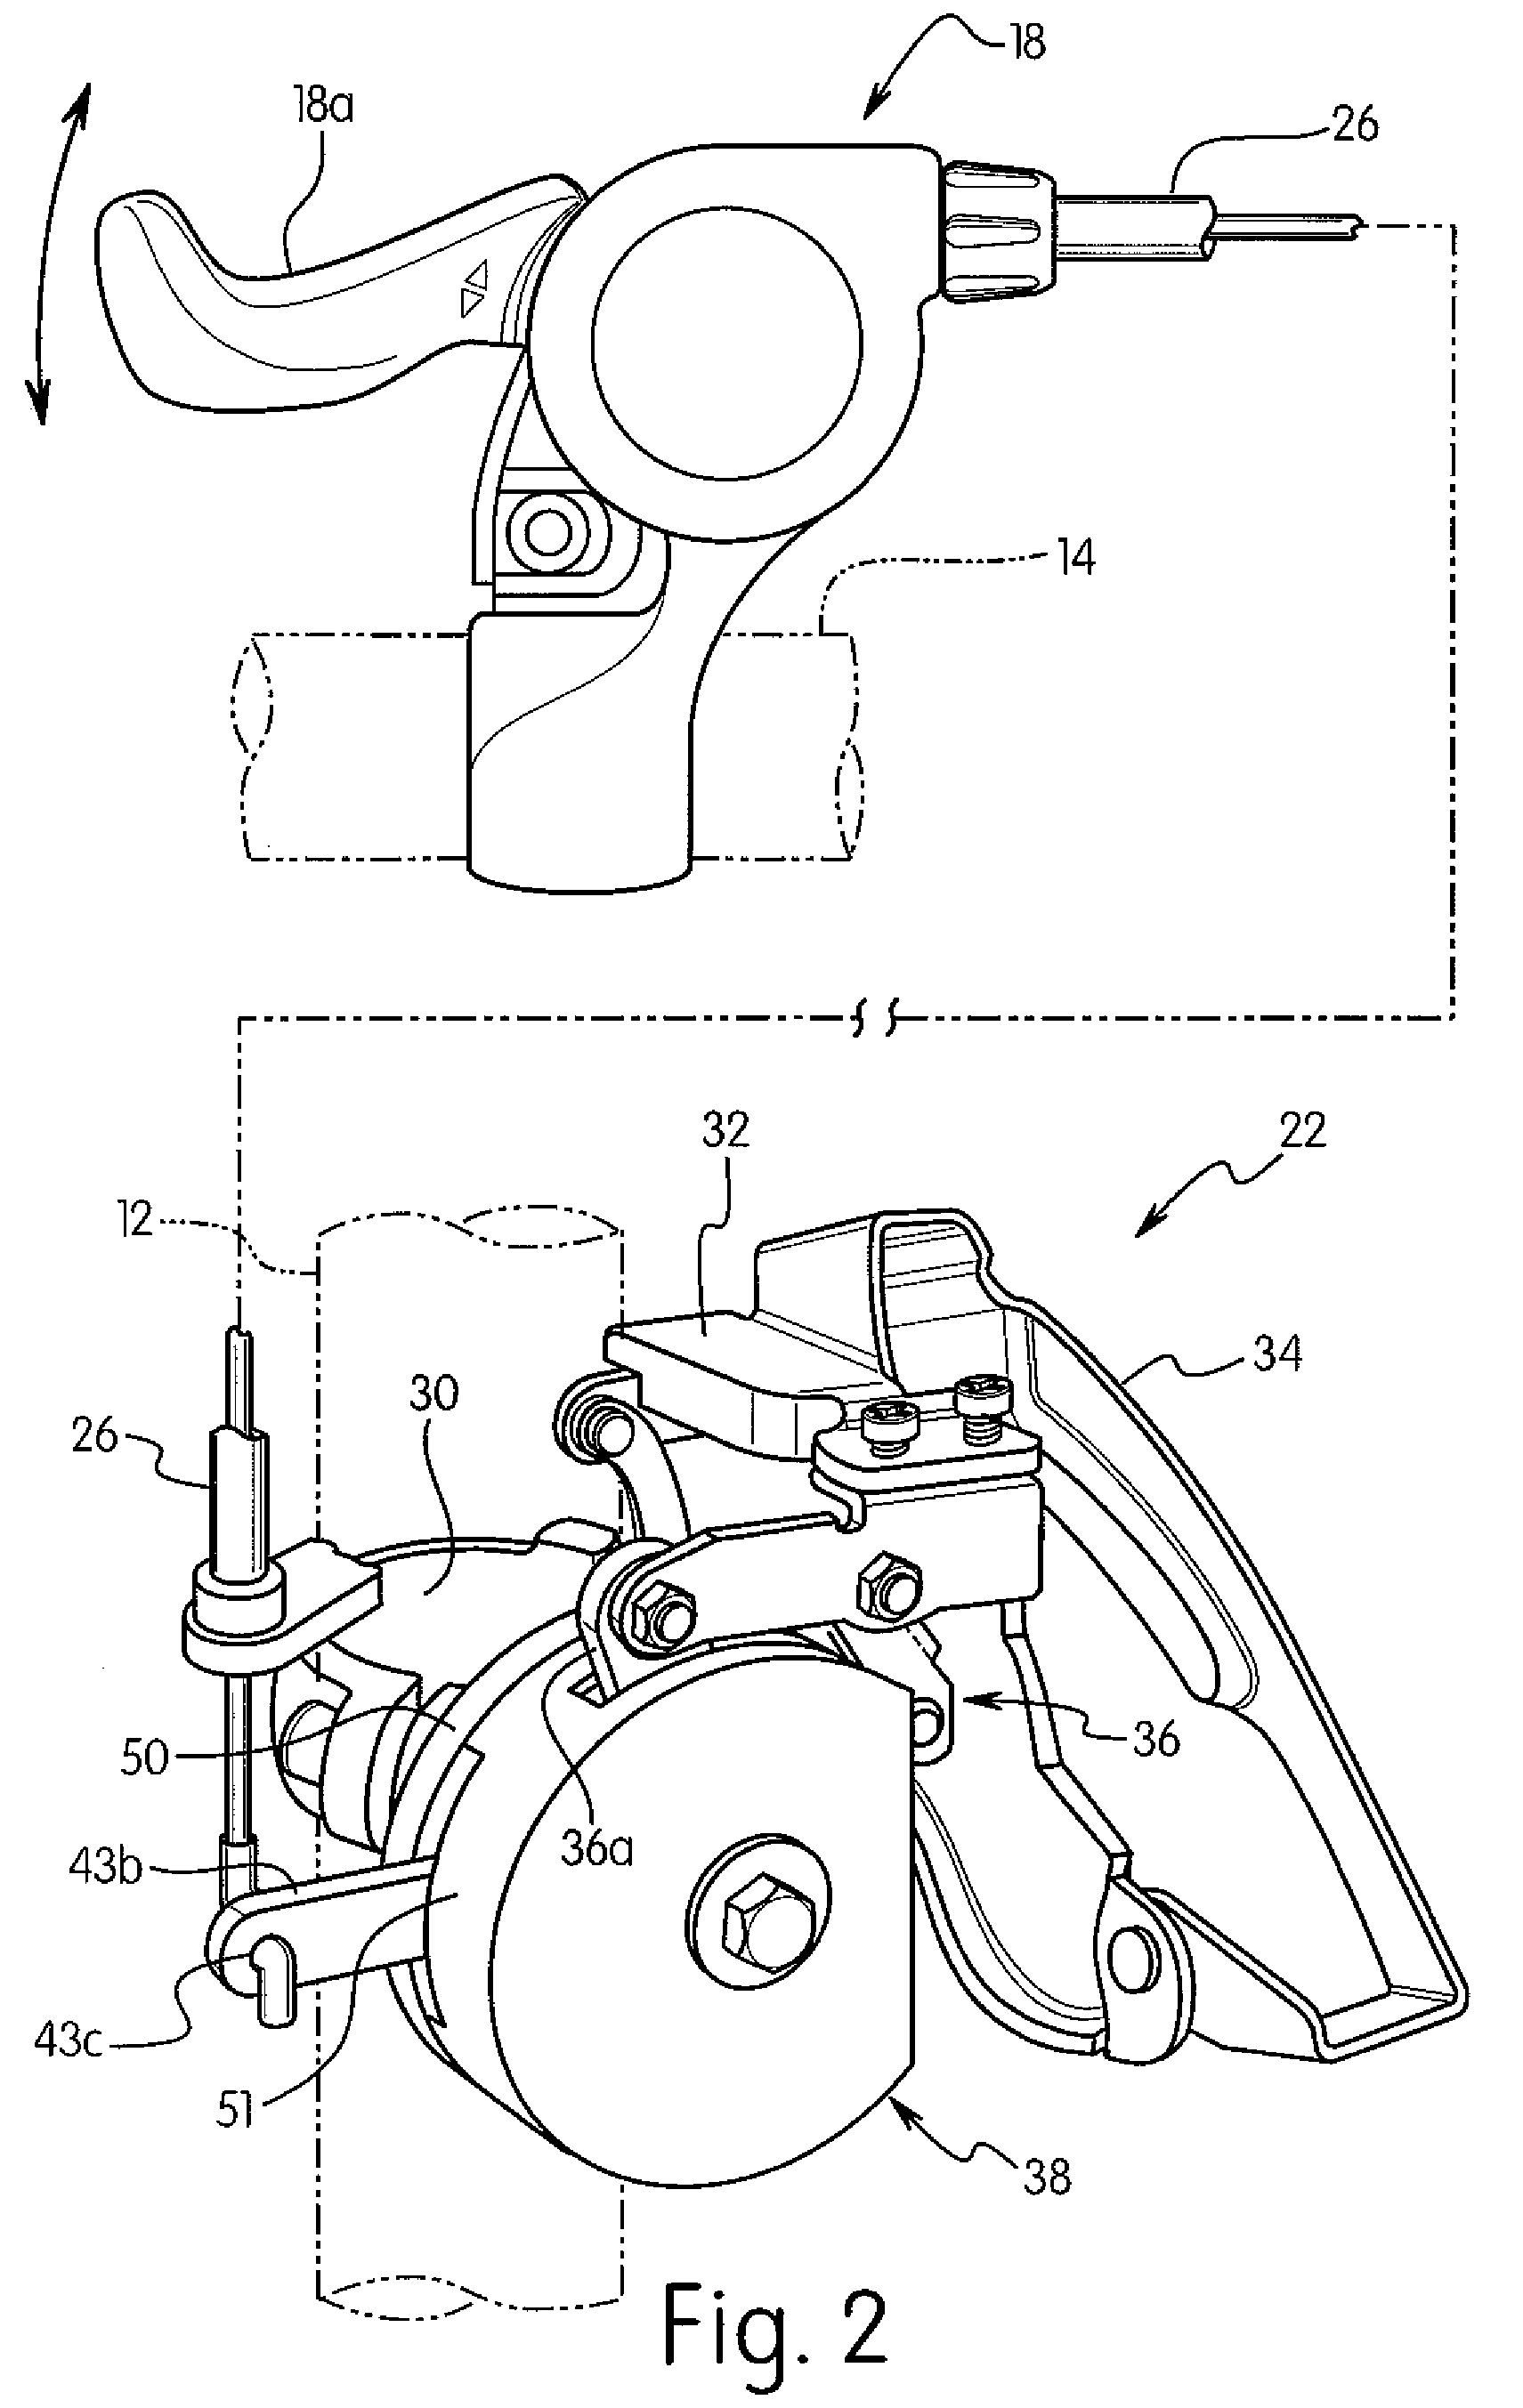 Bicycle component positioning device